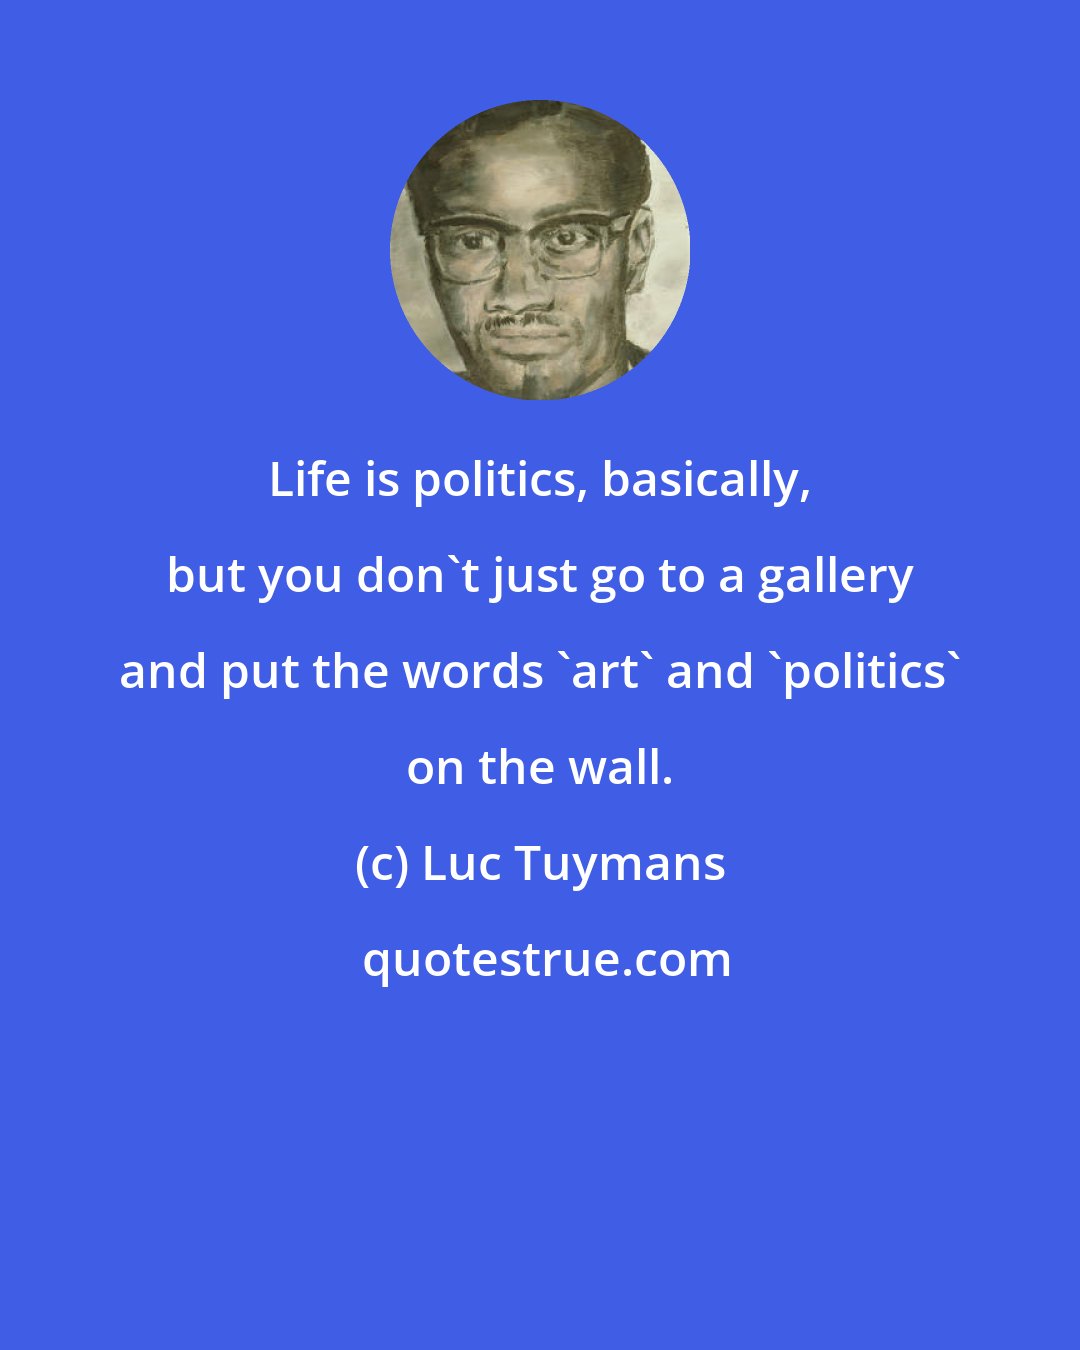 Luc Tuymans: Life is politics, basically, but you don't just go to a gallery and put the words 'art' and 'politics' on the wall.